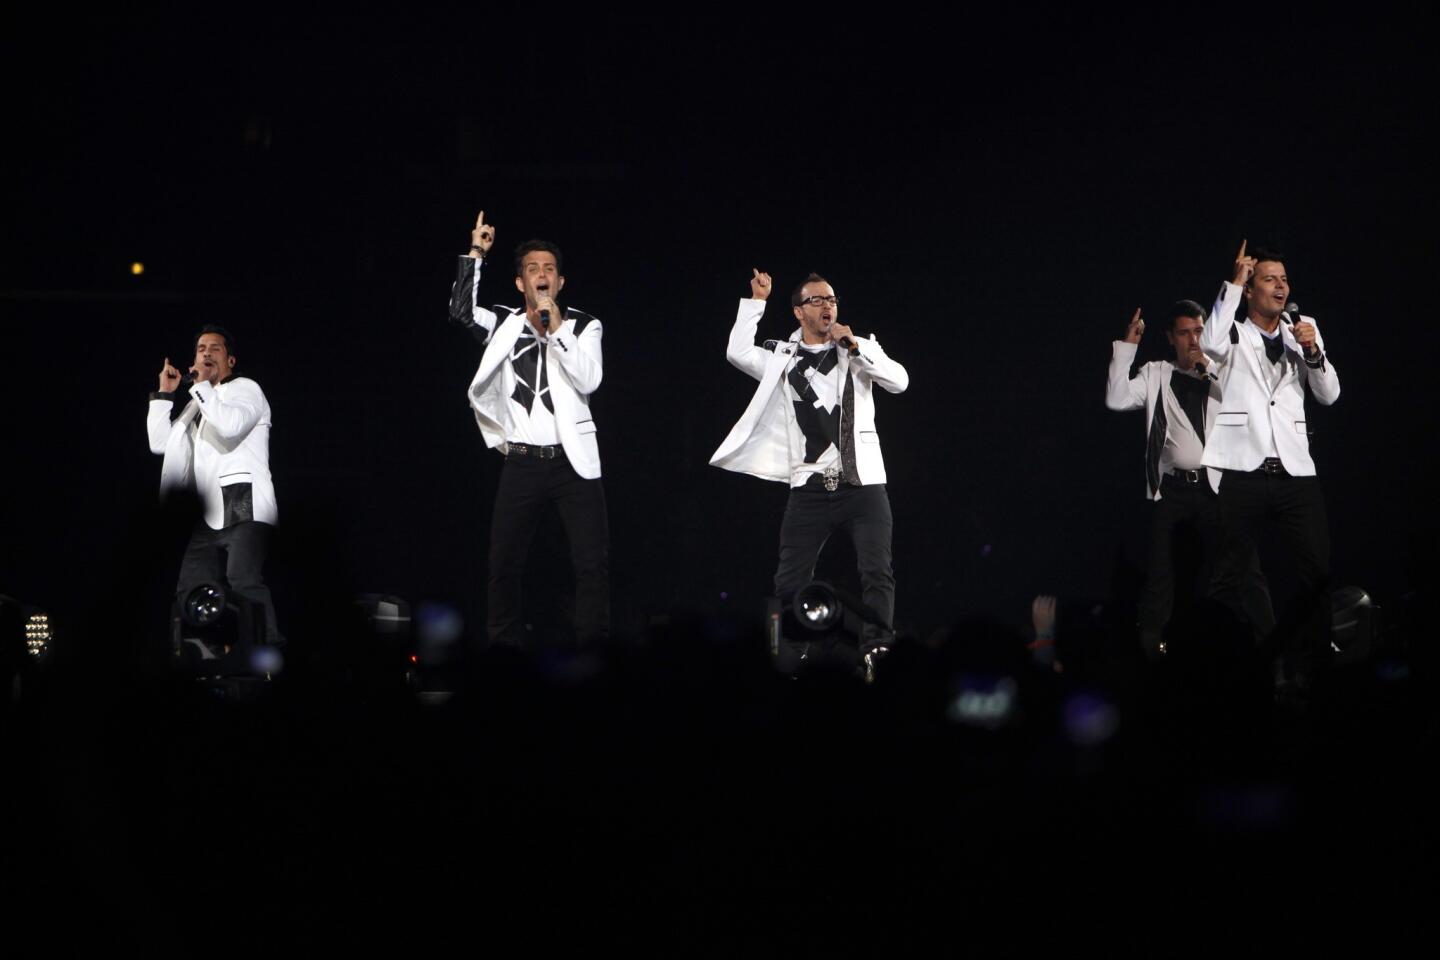 The New Kids on the Block on the stage at Staples Center as part of their 2013 tour.